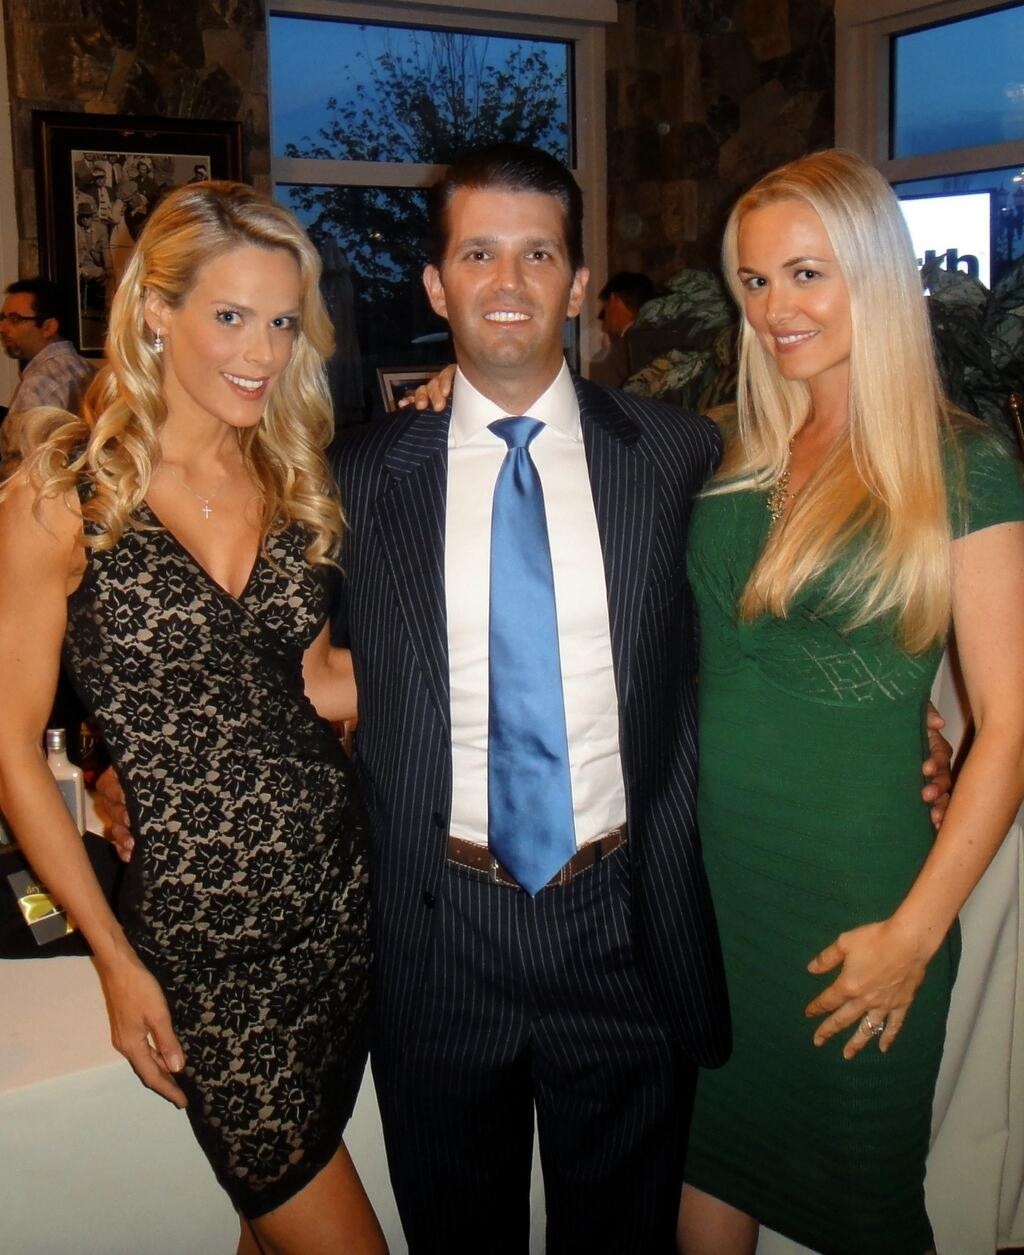 Heidi Albertsen, Donald J. Trump Jr. and Vanessa Trump attending Eric Trump's foundation's annual event benefitting St. Jude pediatric cancer research at Trump National Golf Club in Briarcliff, New York, in September 2013.